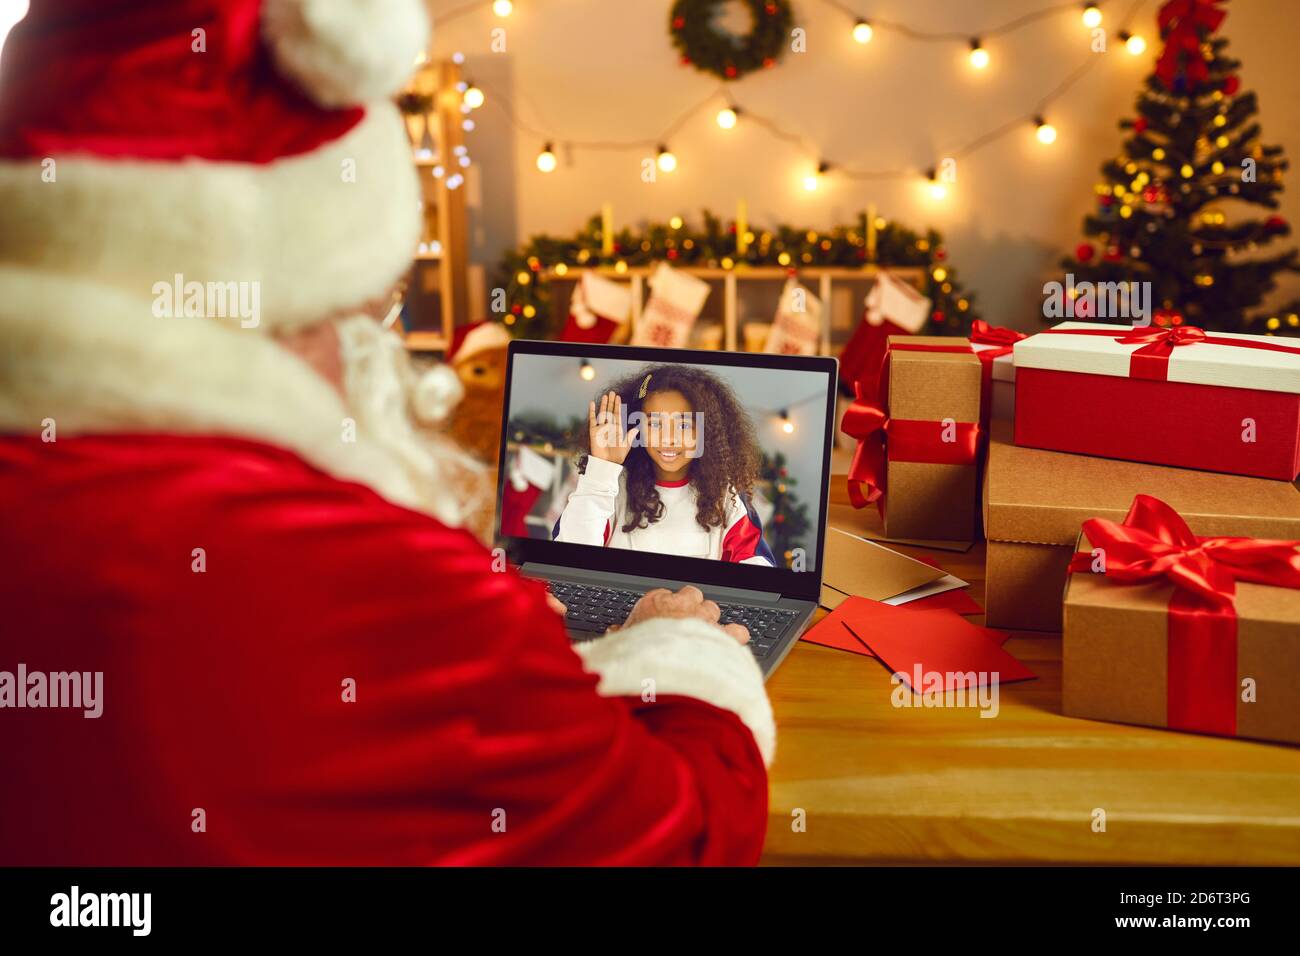 Santa Claus video calling a happy African American girl to wish her Merry Christmas Stock Photo